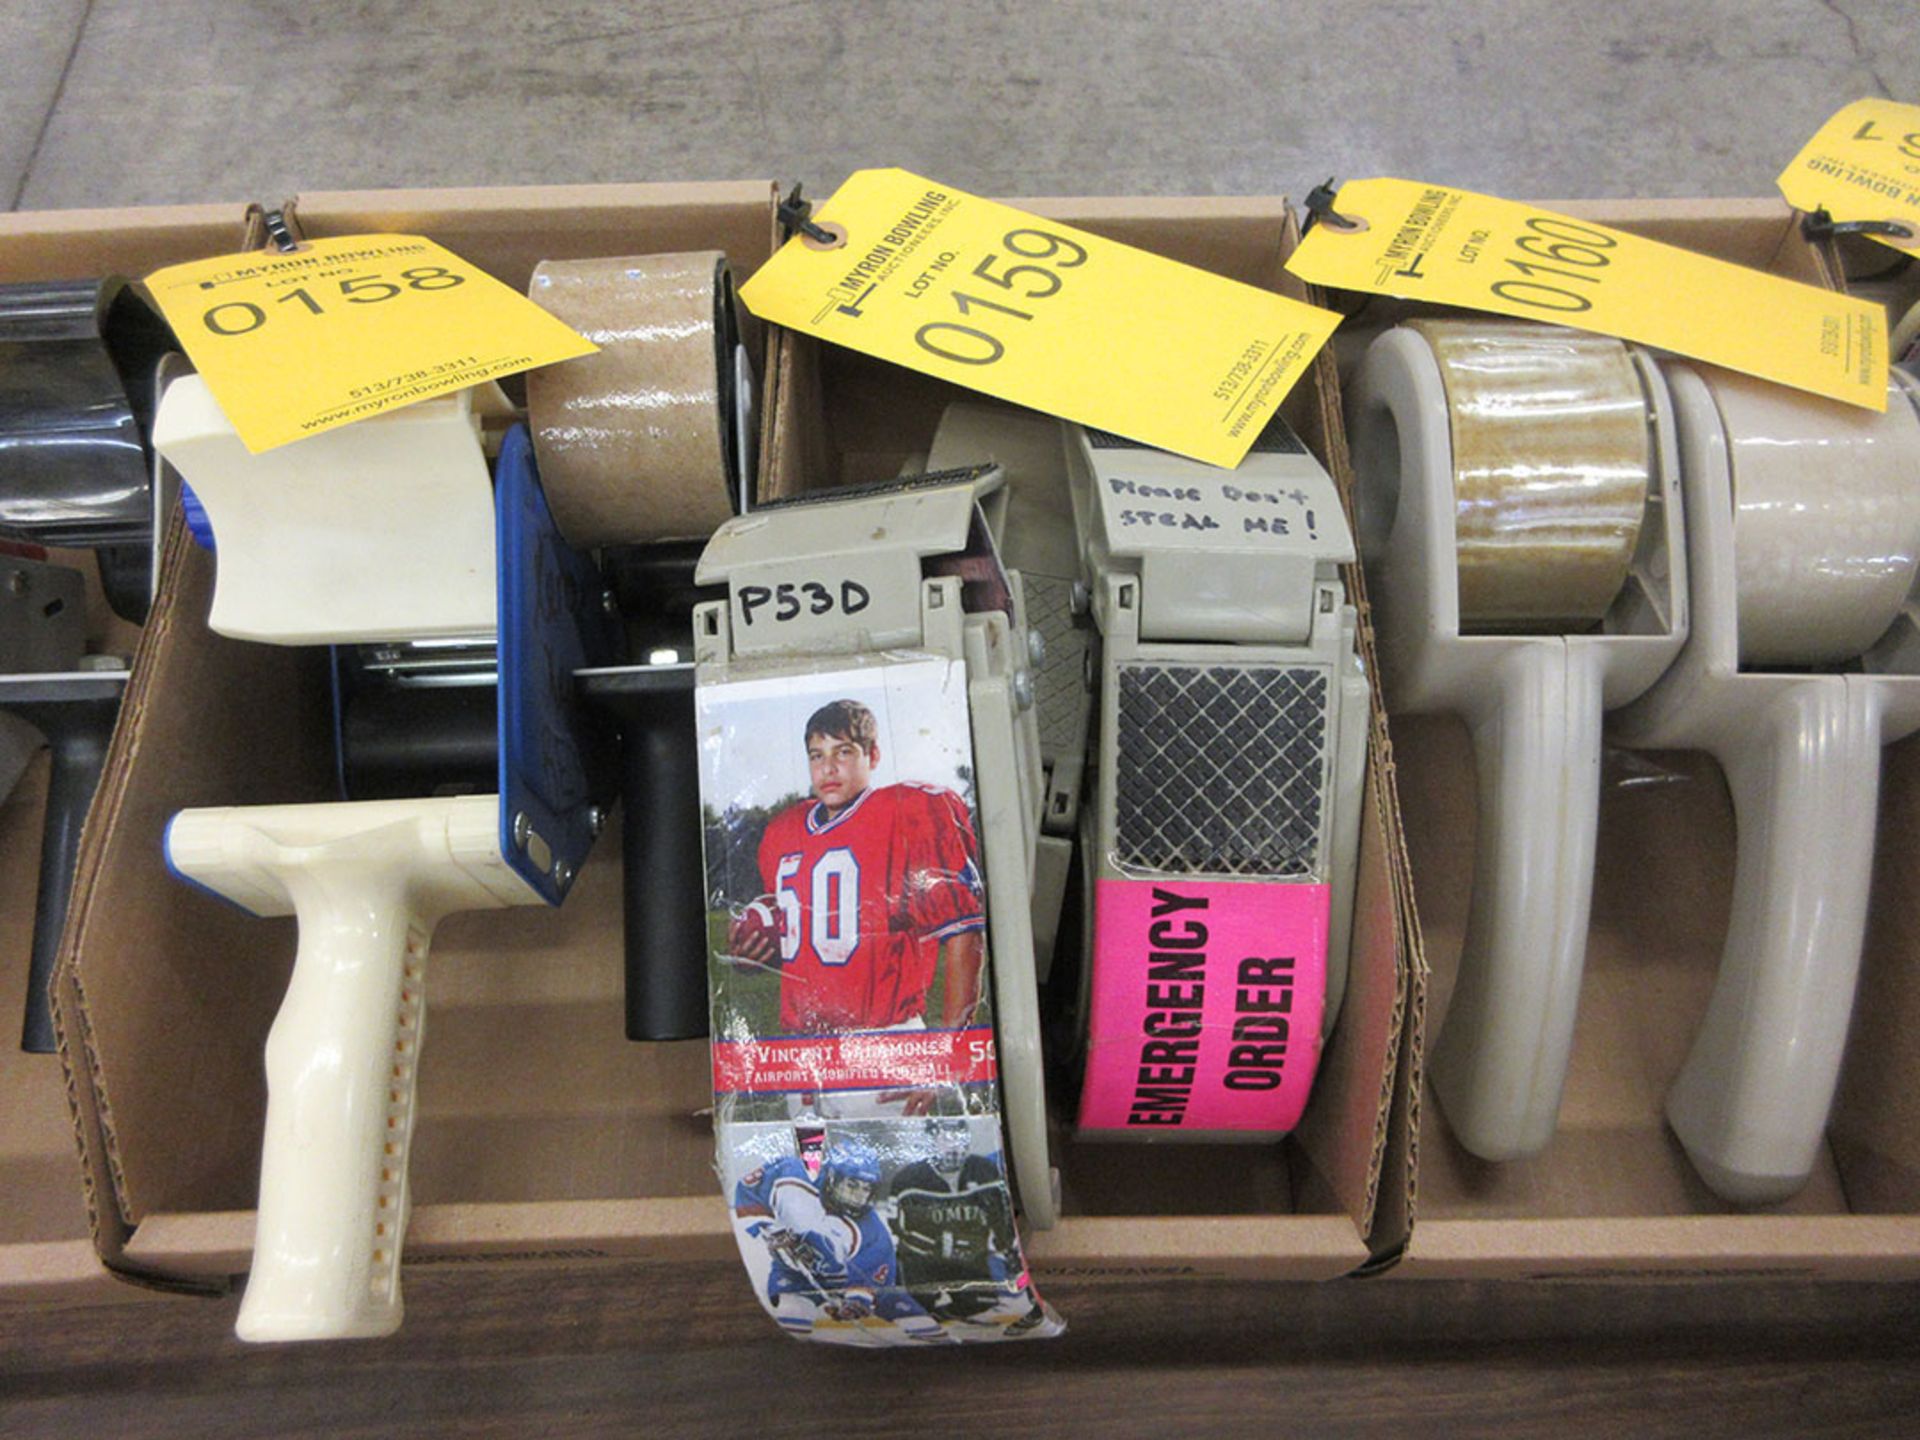 ASSORTED HAND-HELD TAPE DISPENSERS